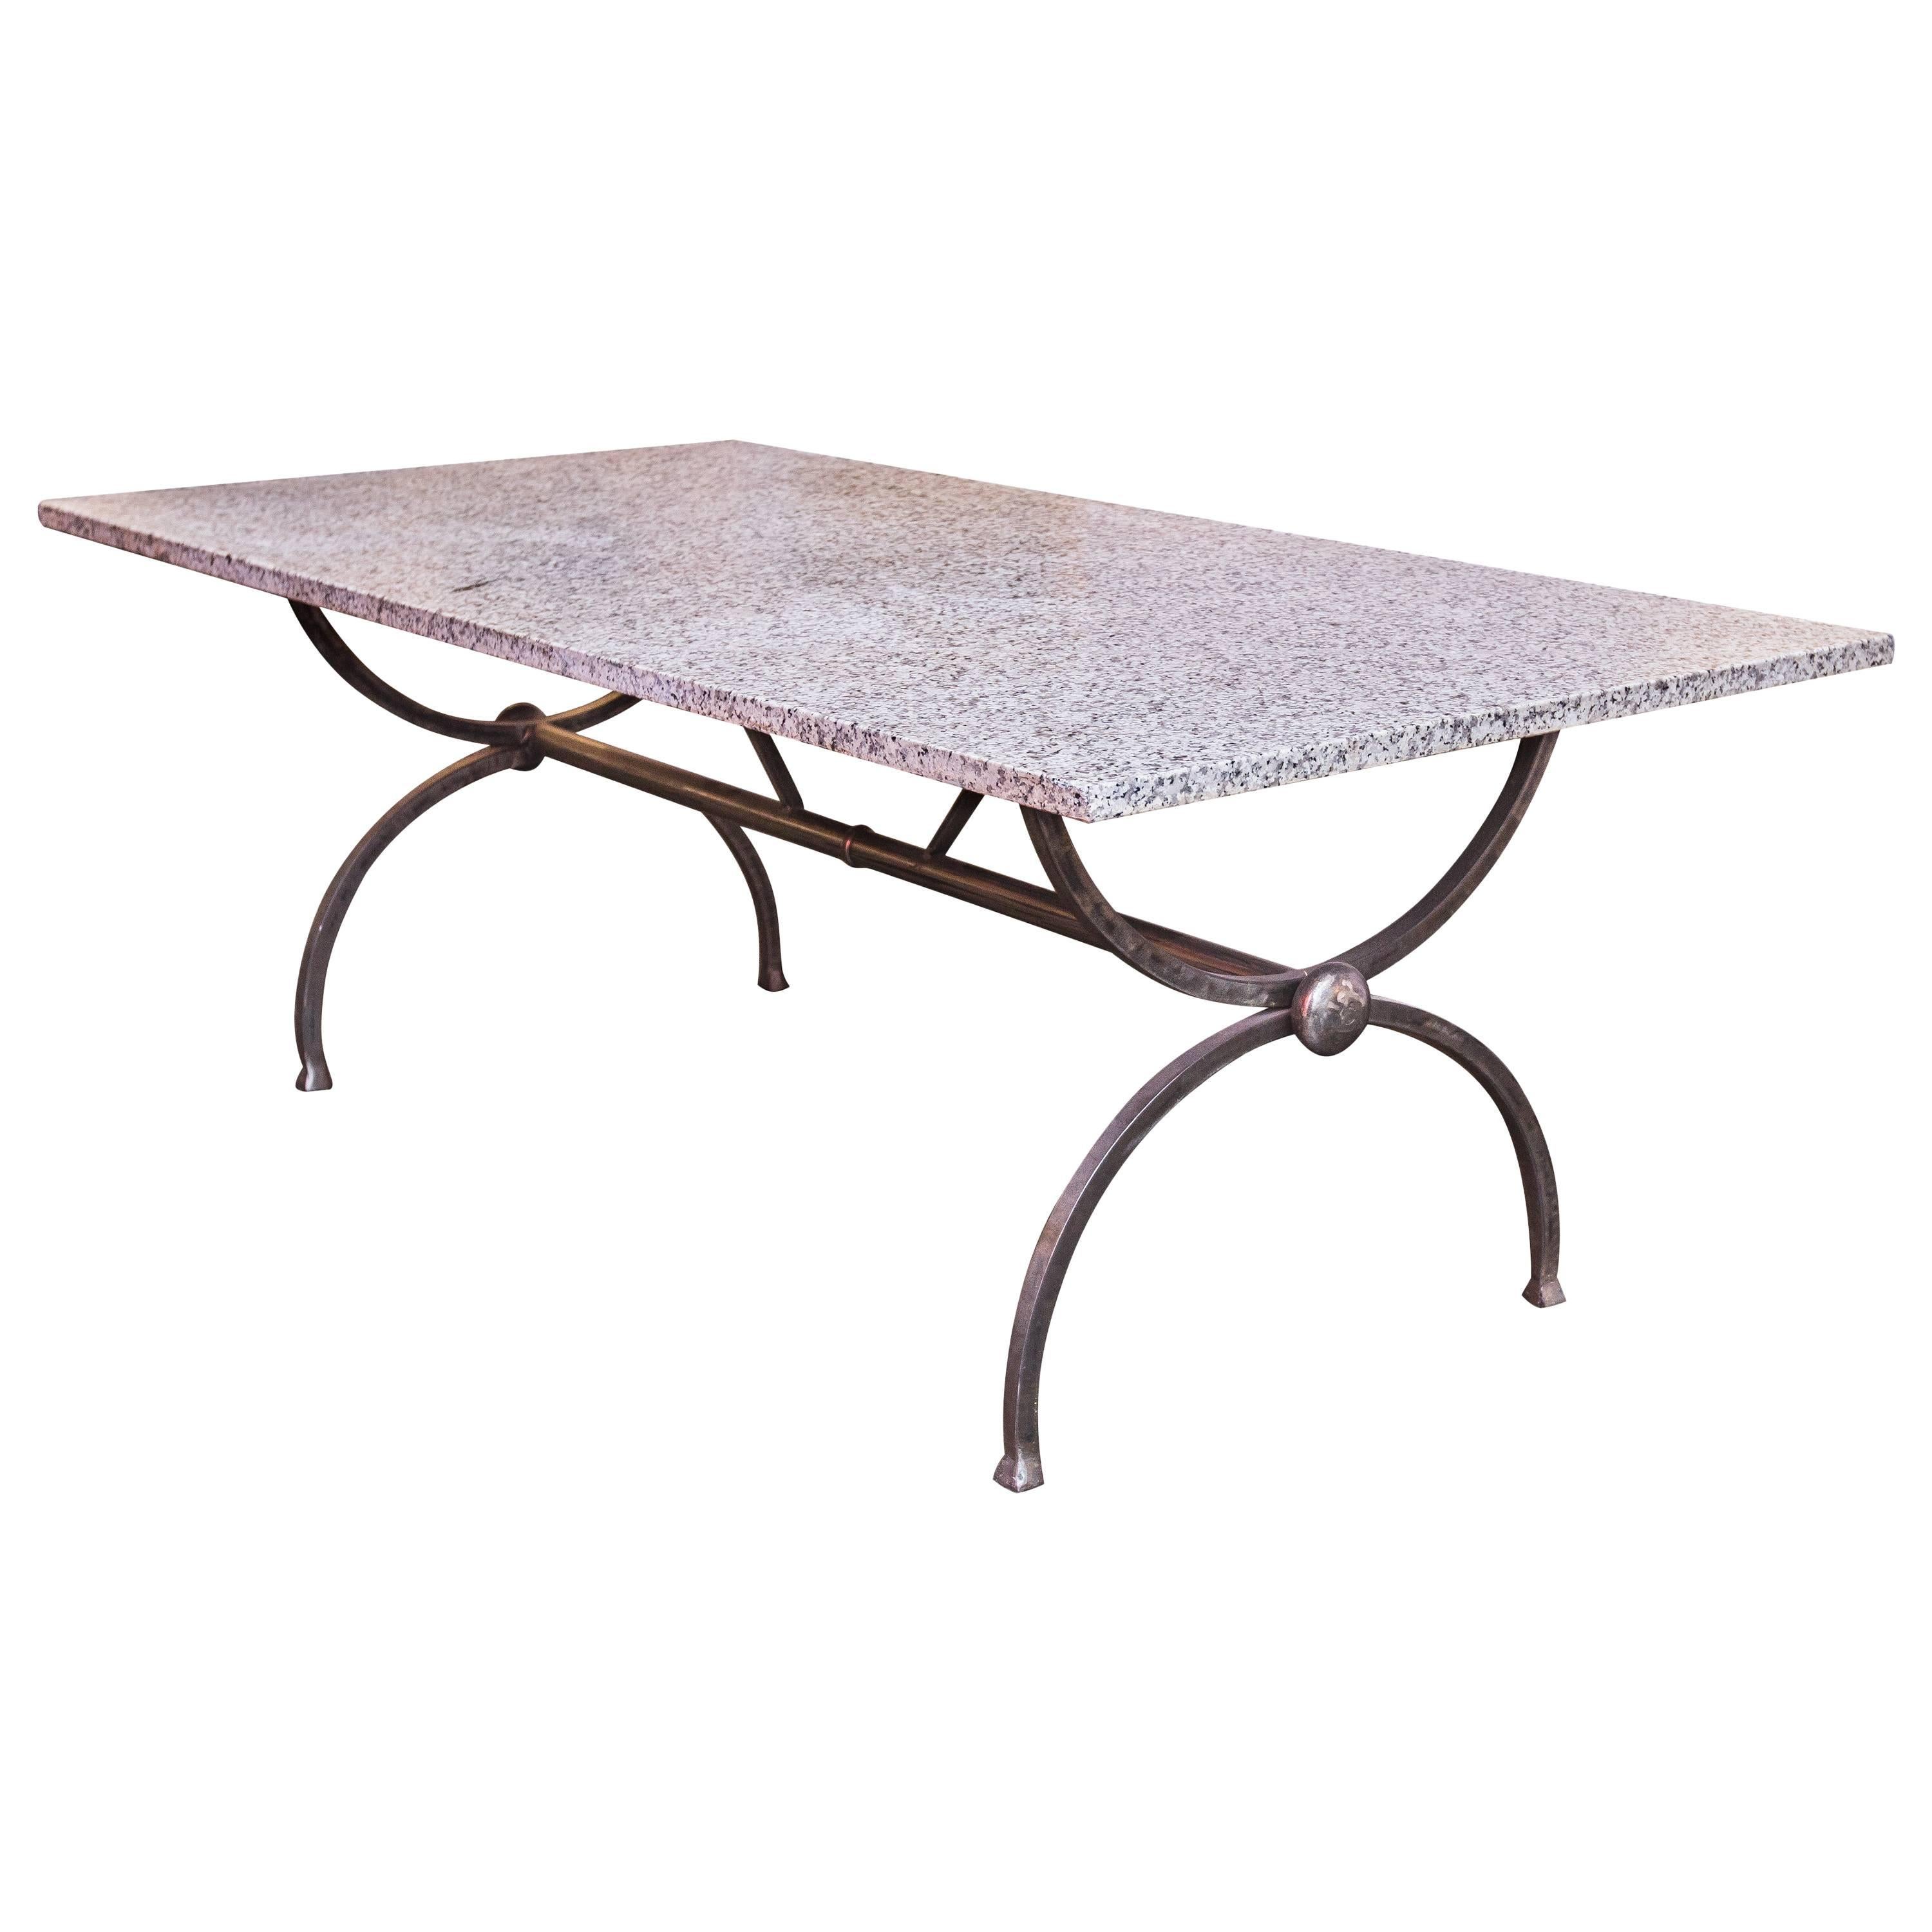 Forged Steel and Granite Dining Table